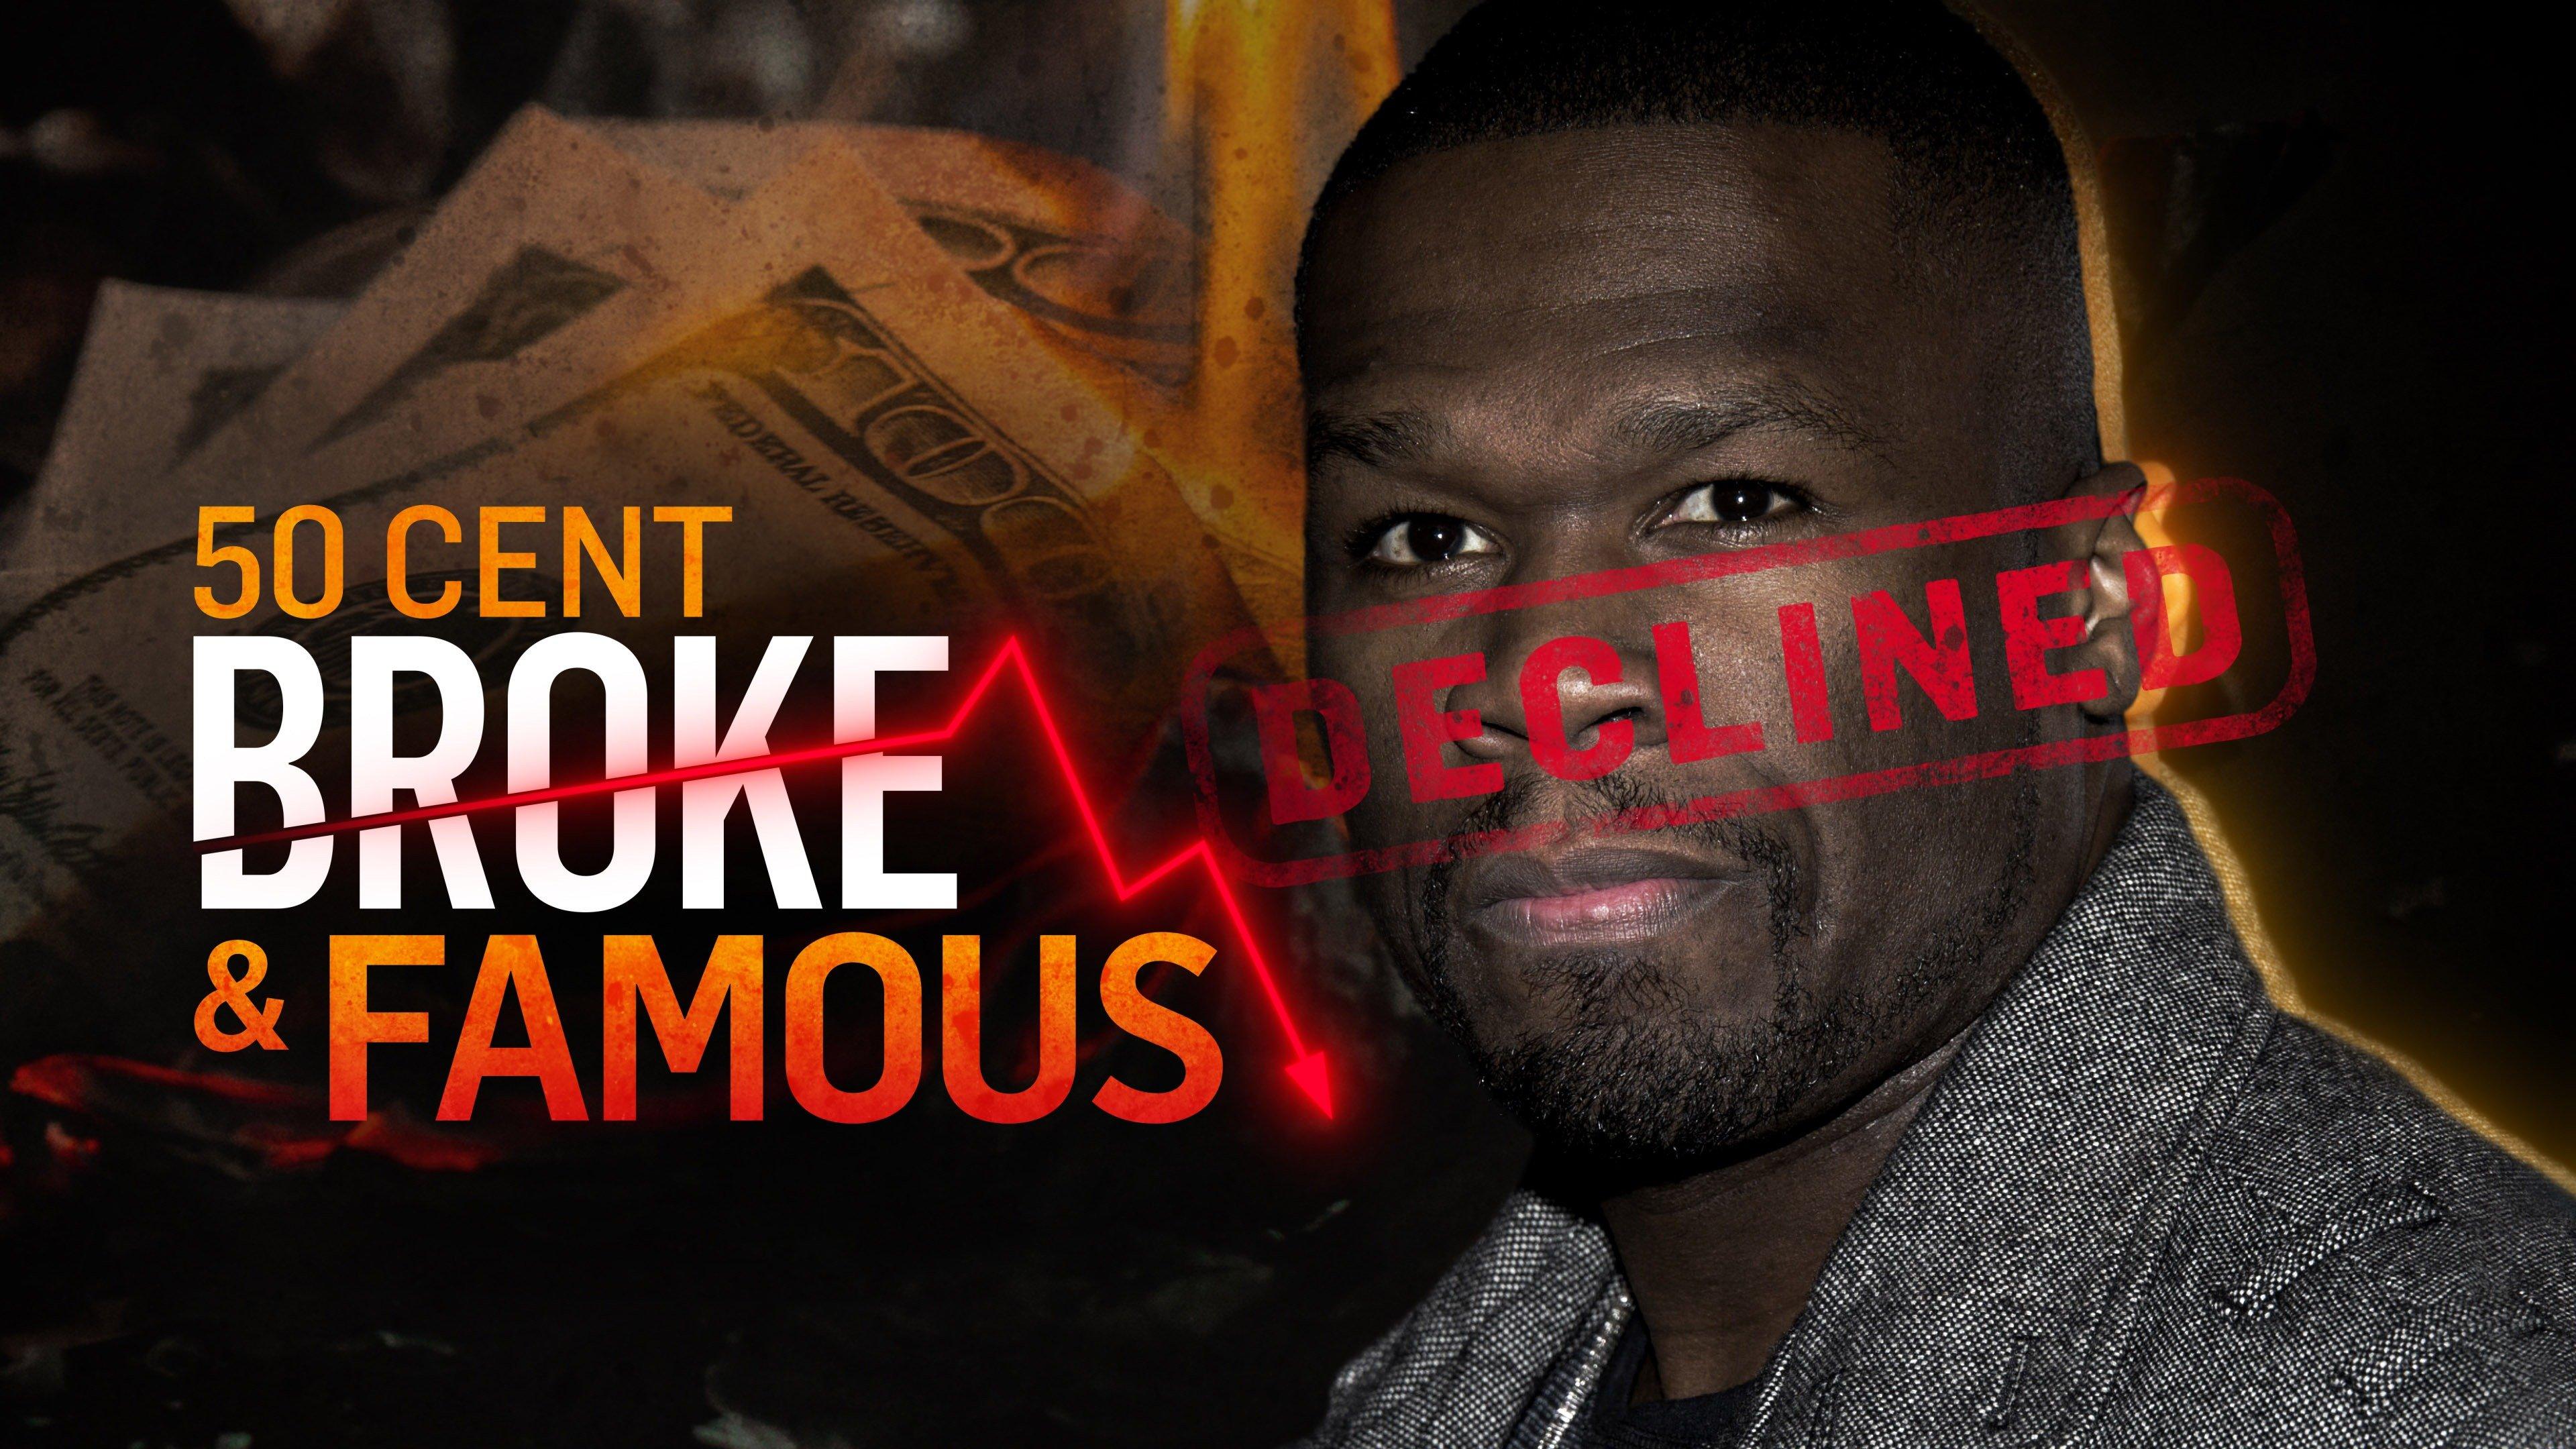 Watch 50 Cent Broke & Famous Streaming Online on Philo (Free Trial)